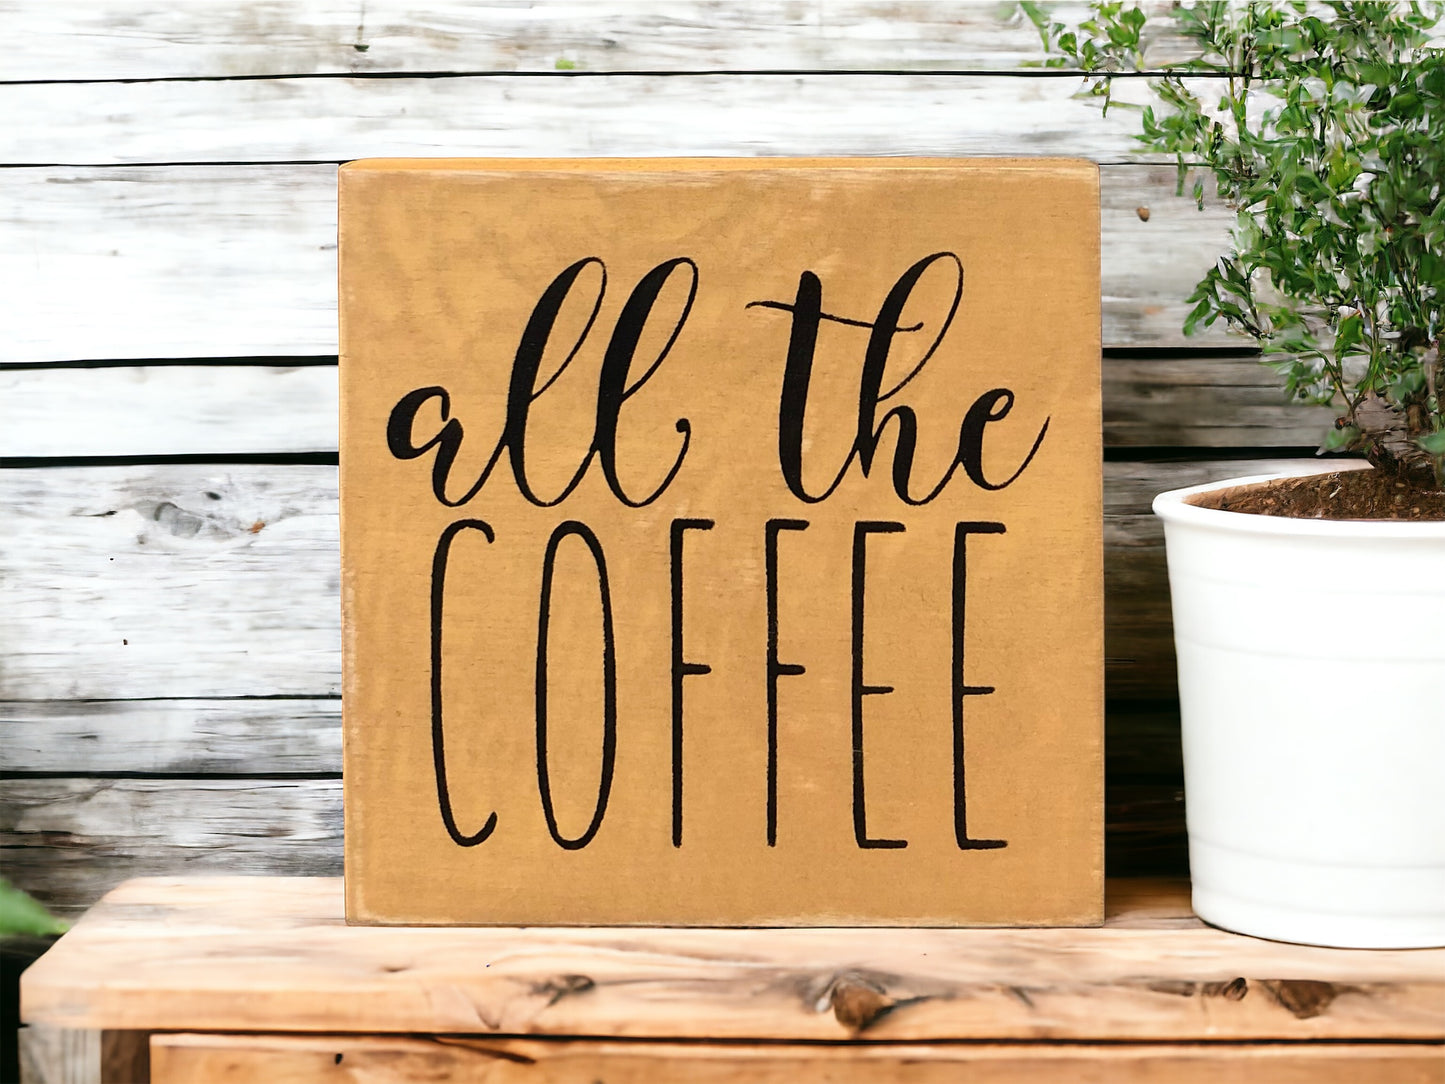 "All the coffee" wood sign